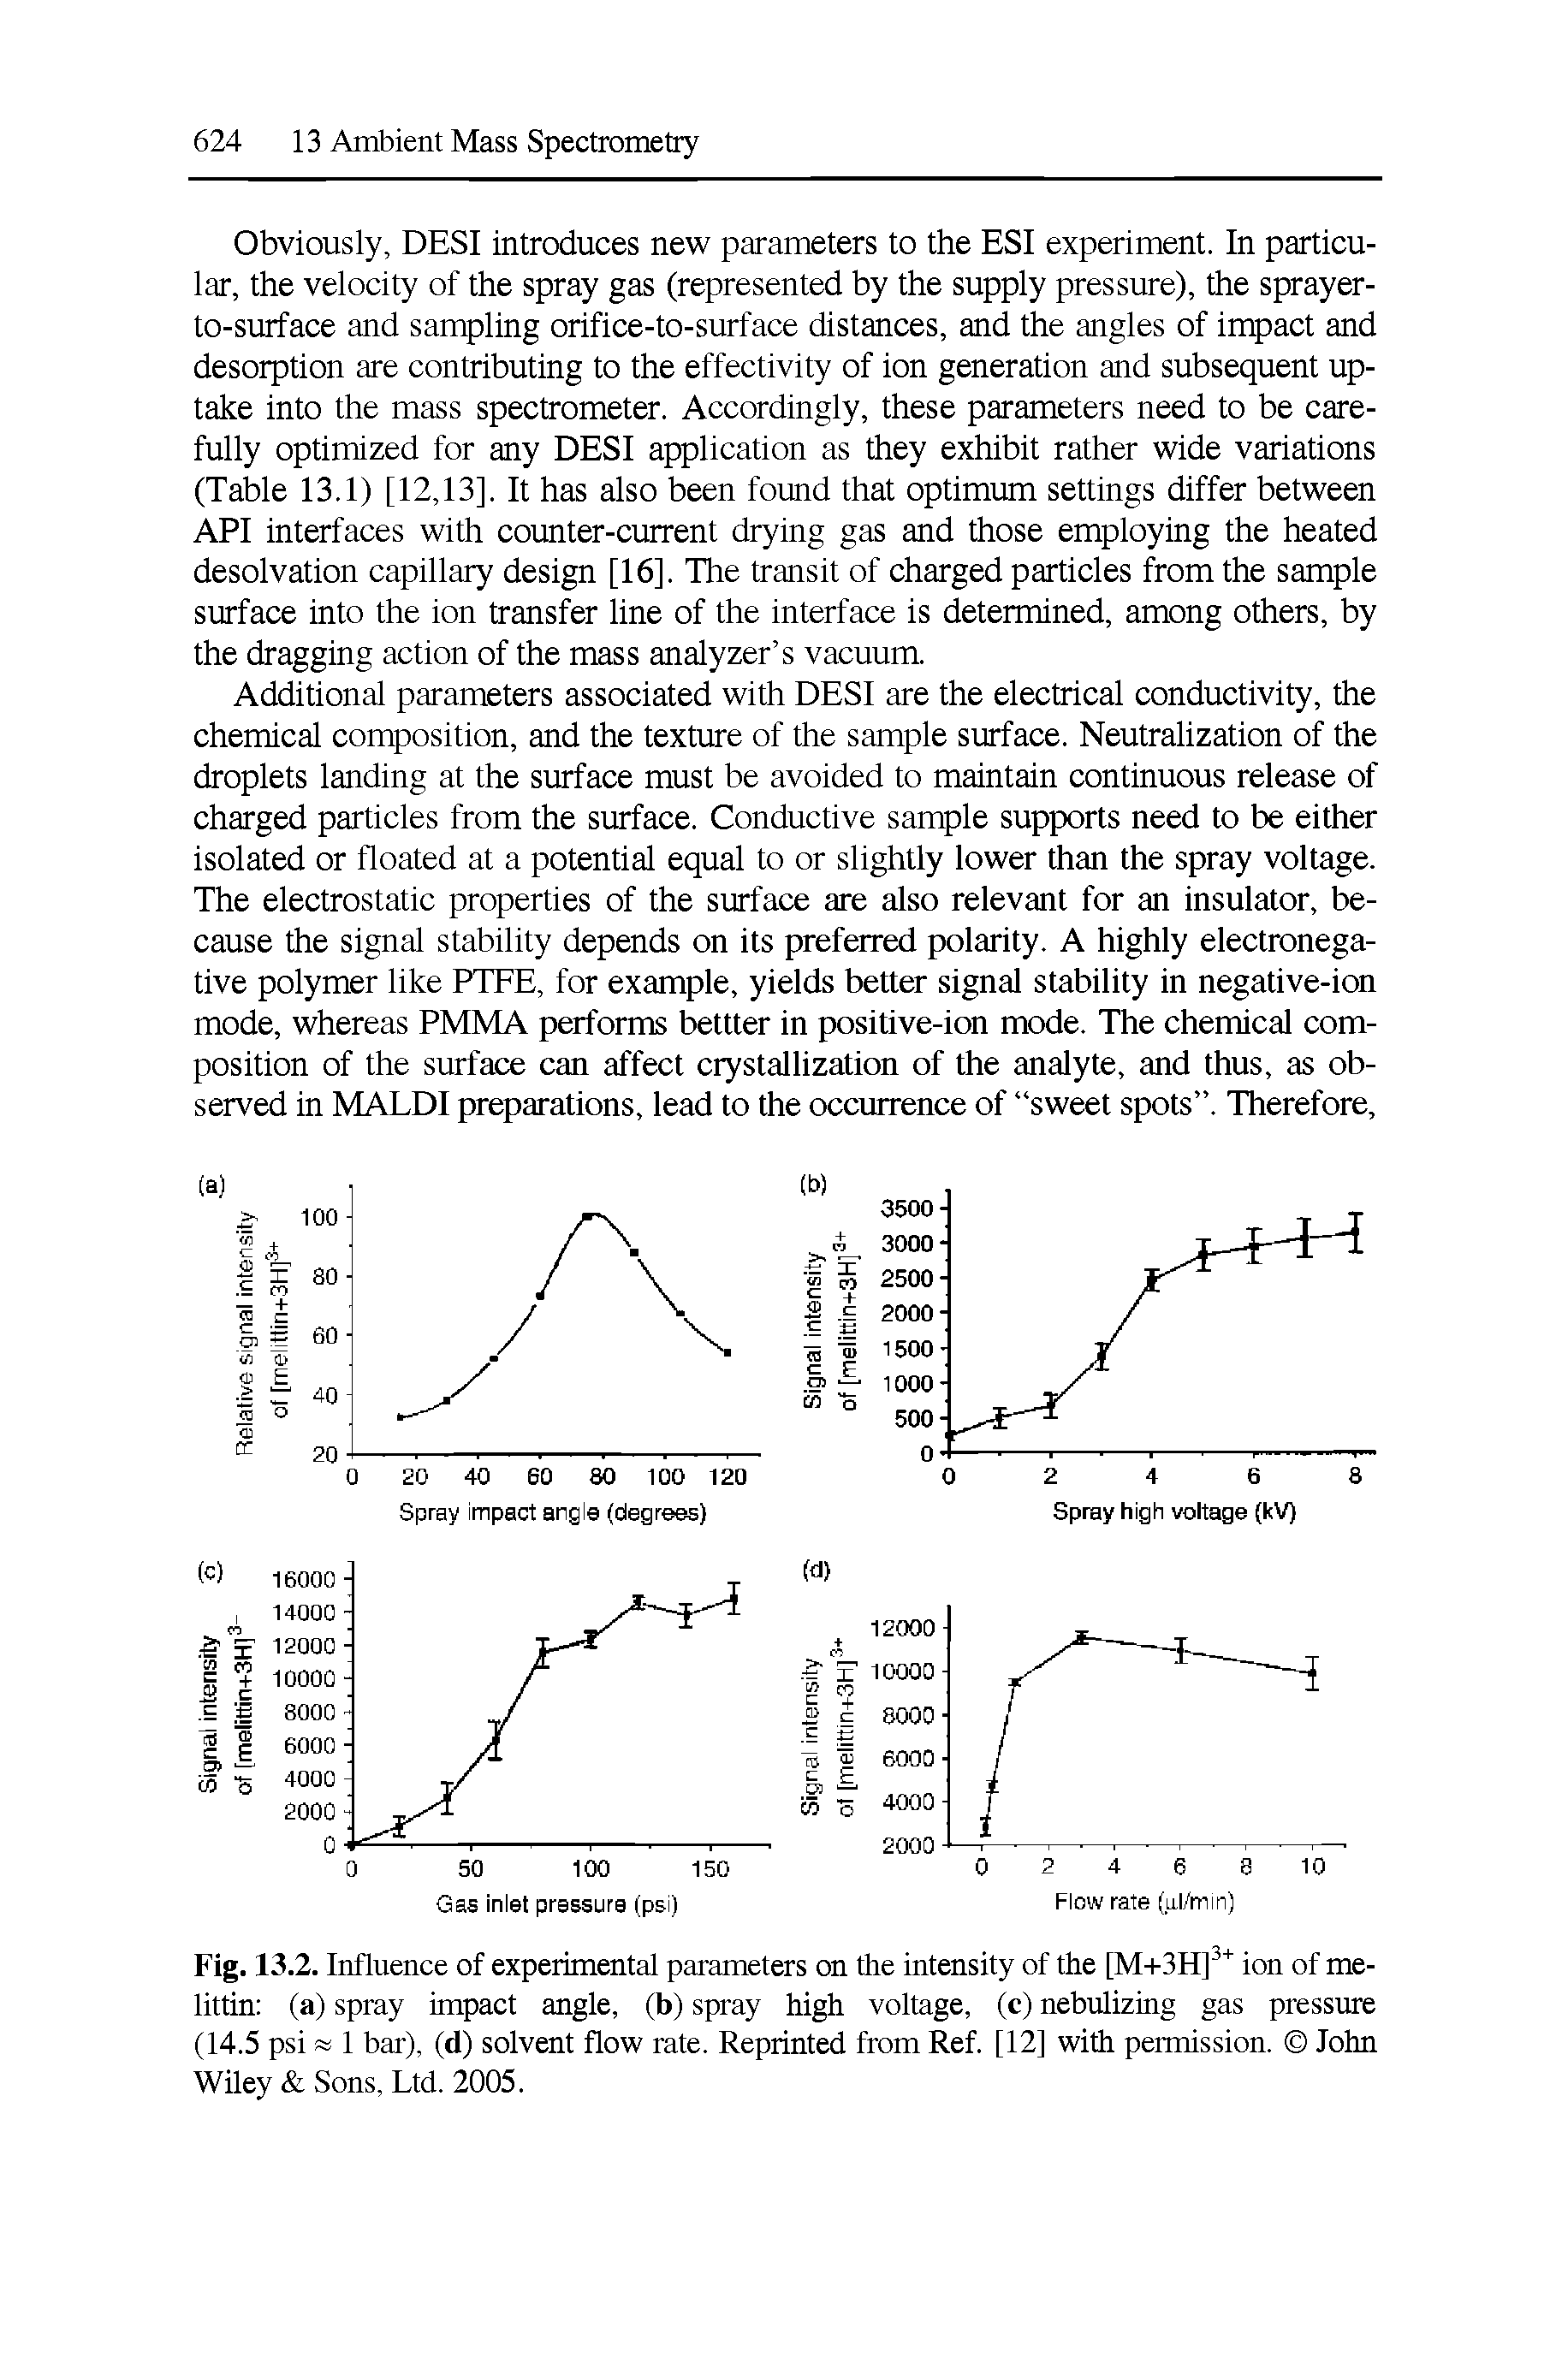 Fig. 13.2. Influence of experimental parameters on the intensity of the [M-t-SH] "" ion of me-littin (a) spray impact angle, (b) spray high voltage, (c) nebulizing gas pressure (14.5 psi 1 bar), (d) solvent flow rate. Reprinted from Ref. [12] with permission. John Wiley Sons, Ltd. 2005.